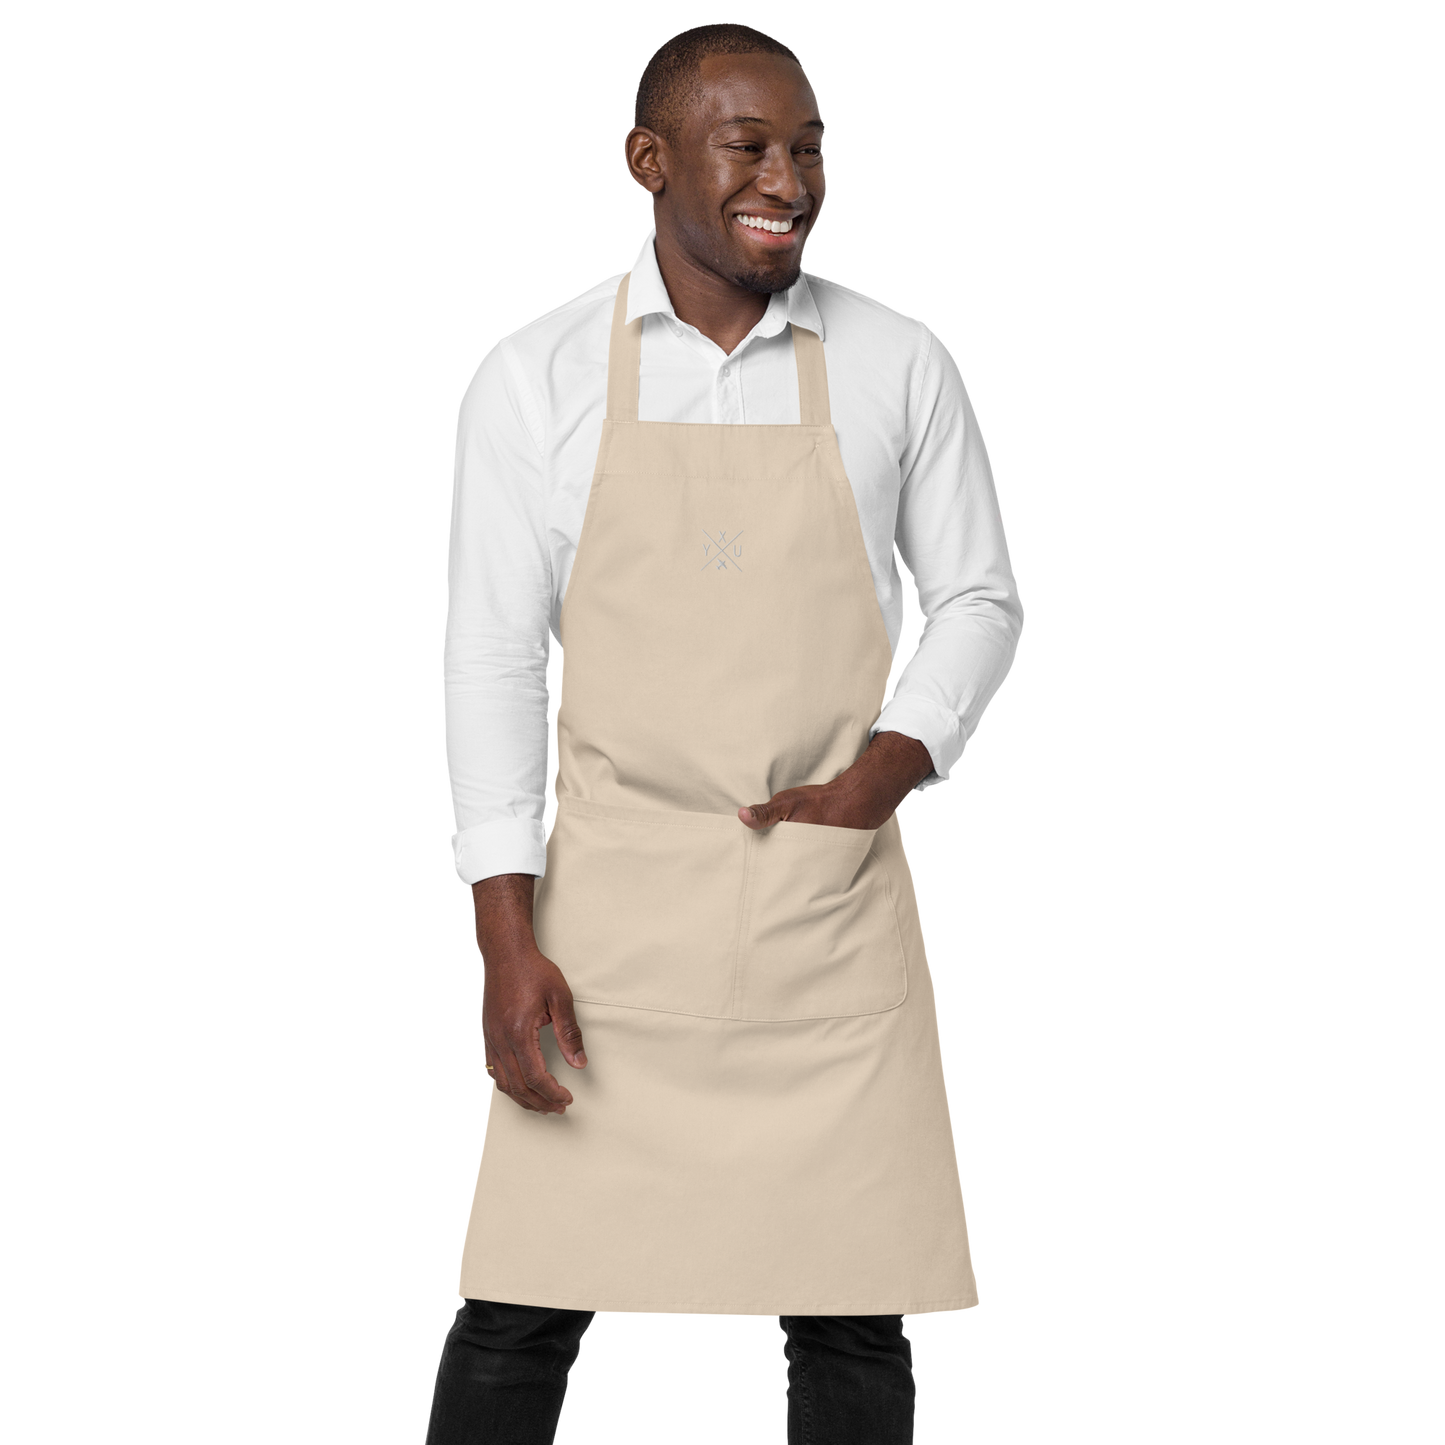 YHM Designs - YXU London Organic Cotton Apron - Crossed-X Design with Airport Code and Vintage Propliner - White Embroidery - Image 14